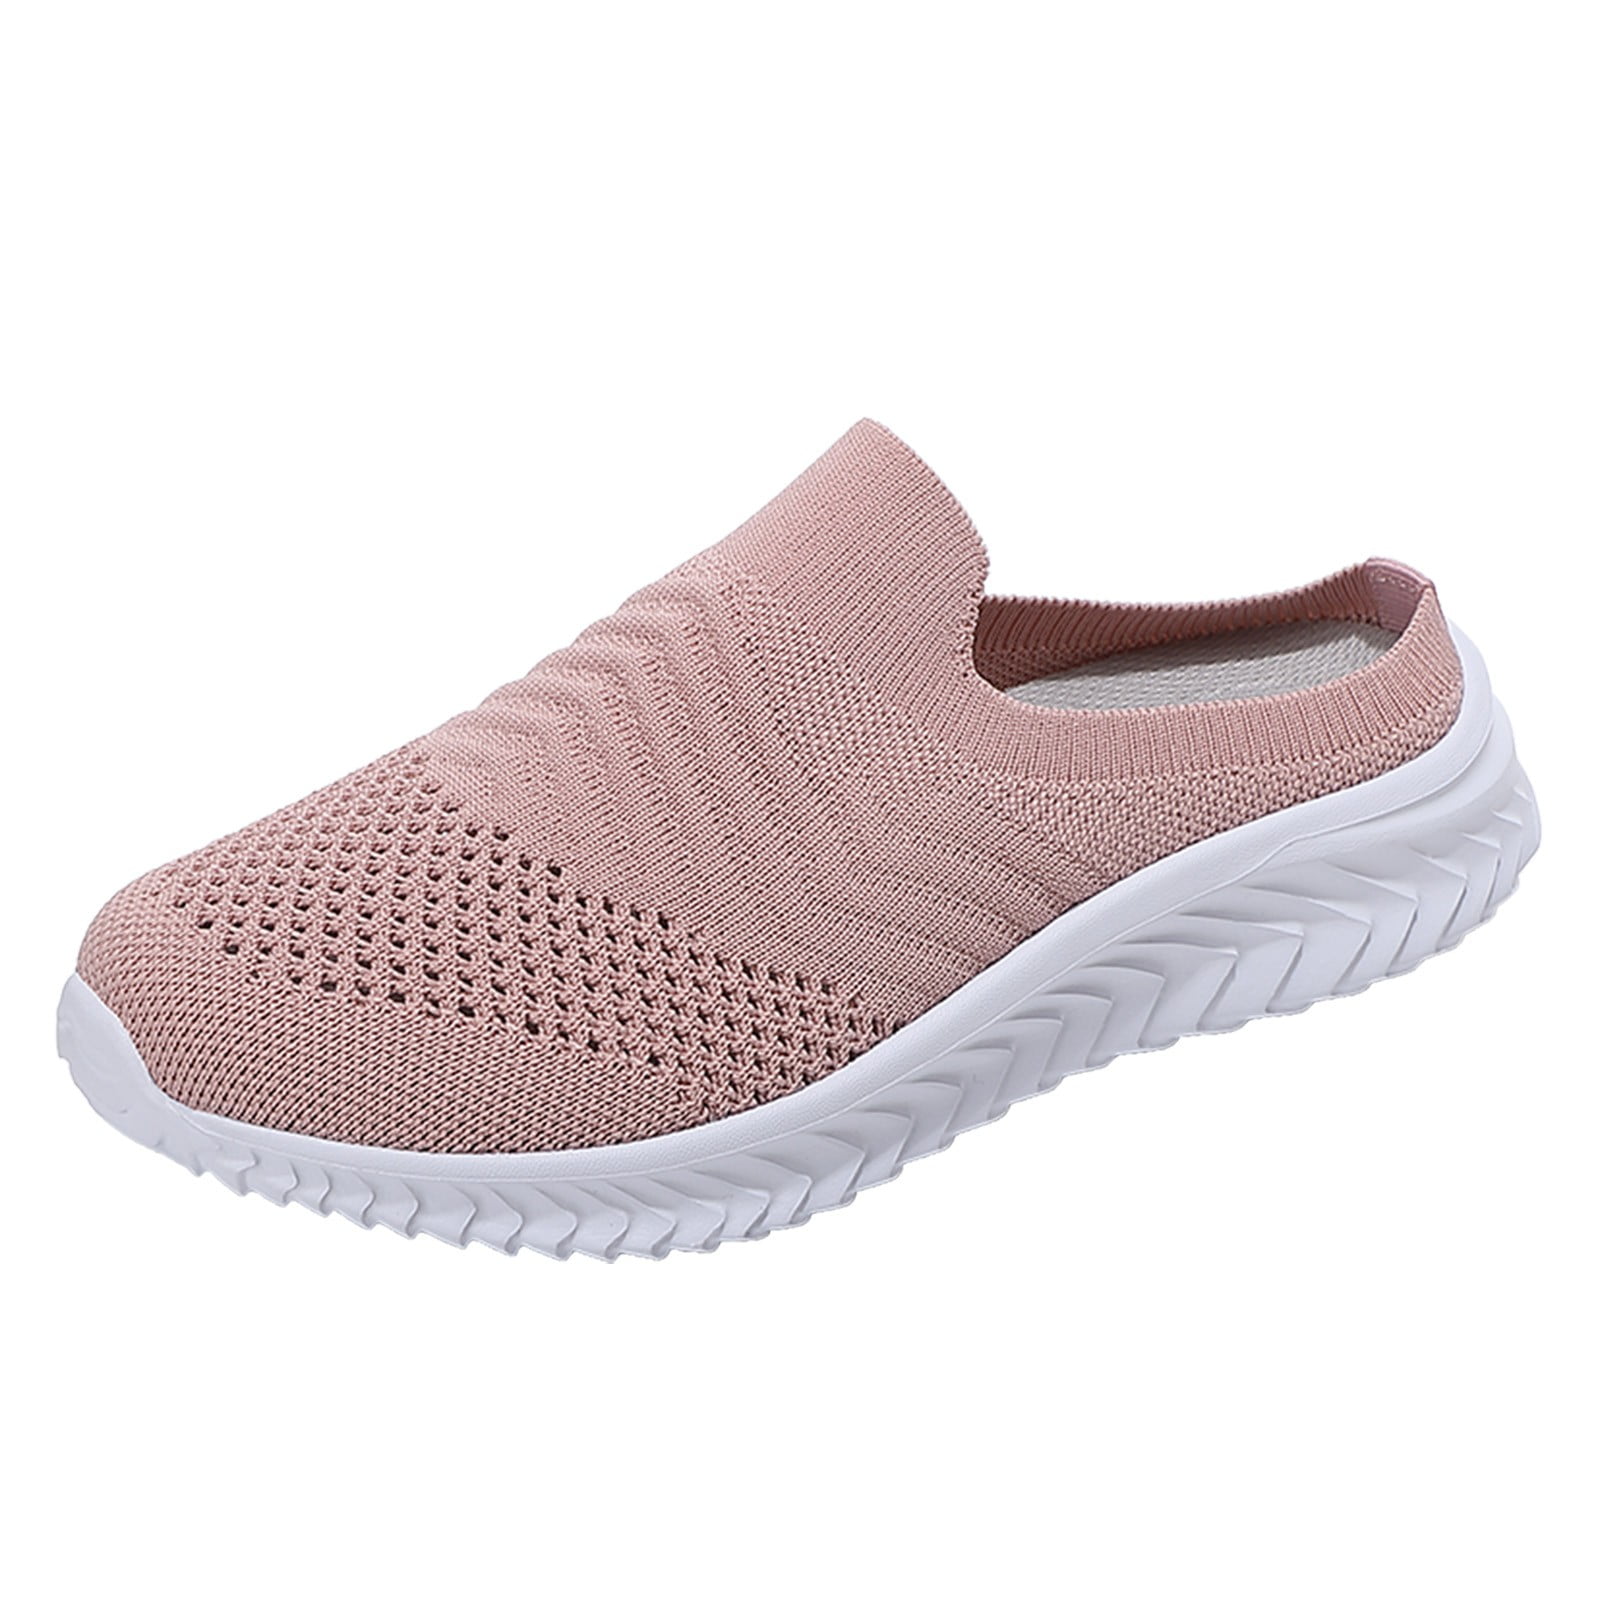 lystmrge Womens Sneakers Size 6 Womens Sneakers under 60 Multi Color Shoes  for Women Sneakers Fashion Wedges Shoes Breathable Casual Sneakers Leisure  Women's Slip On Outdoor Women's Sneakers 